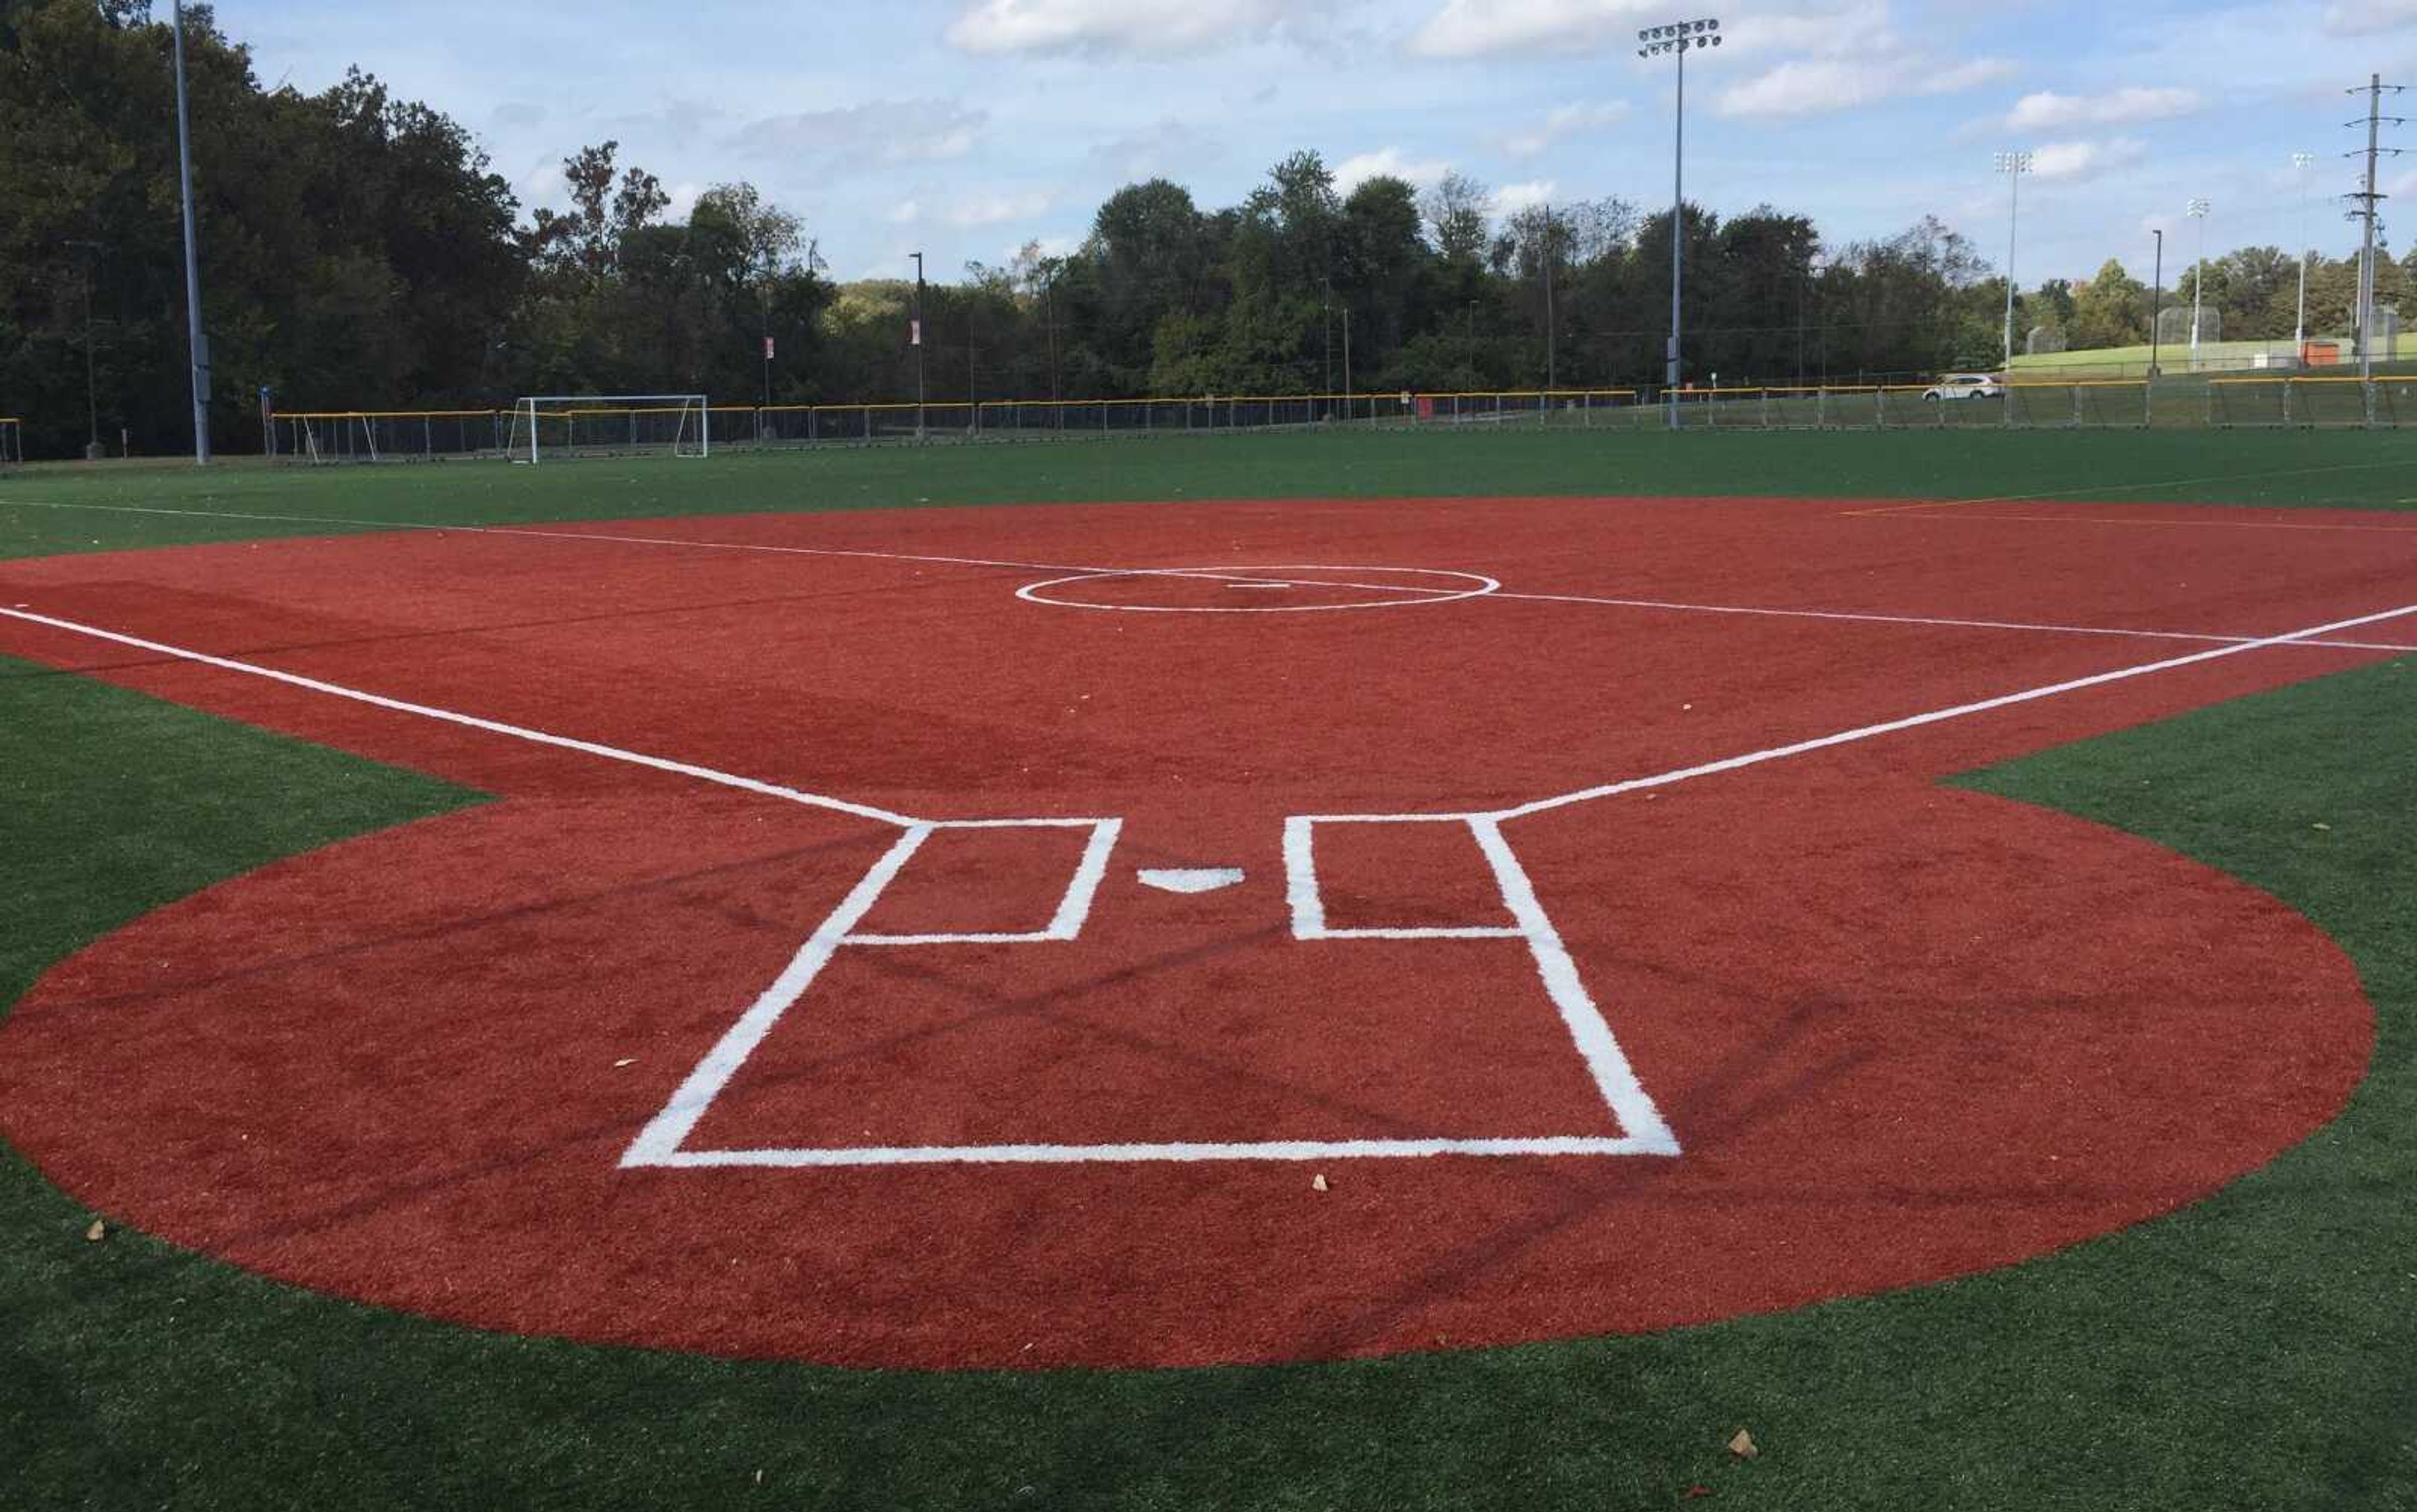 Turf softball and soccer fields were installed over the summer for the campus intramural fields.